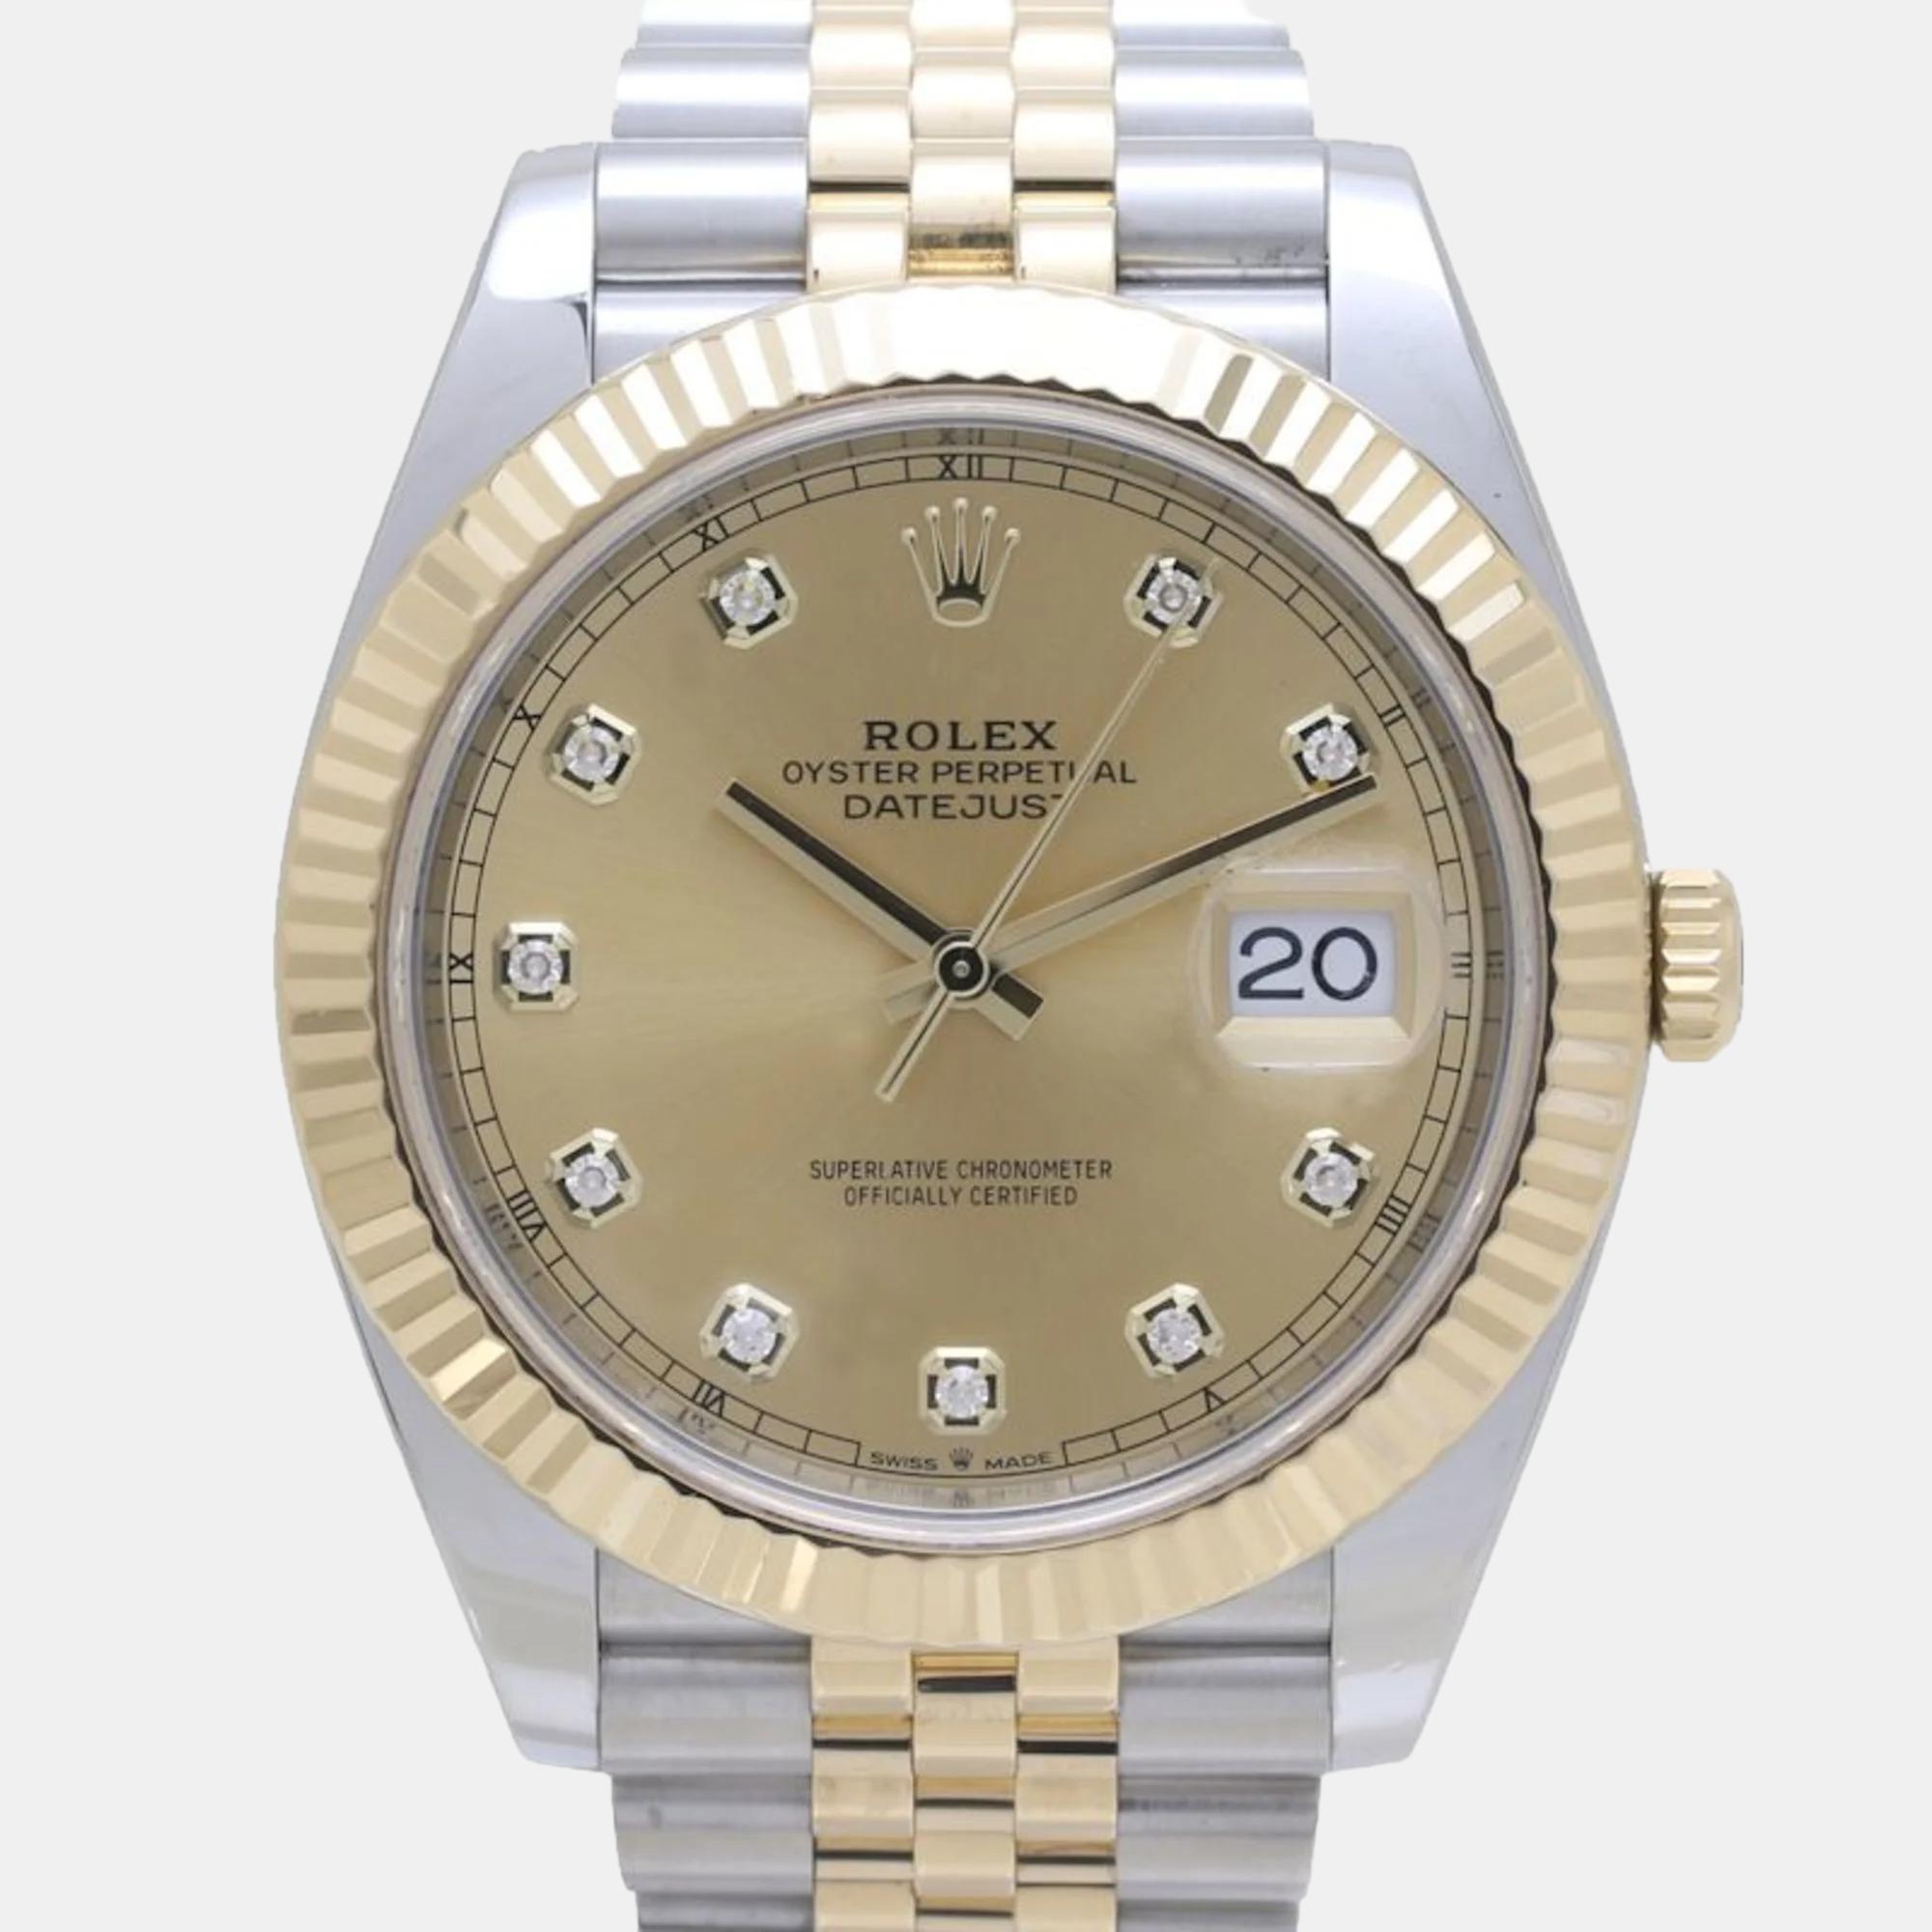 Rolex champagne 18k yellow gold stainless steel diamond datejust 126333 automatic men's wristwatch 41 mm